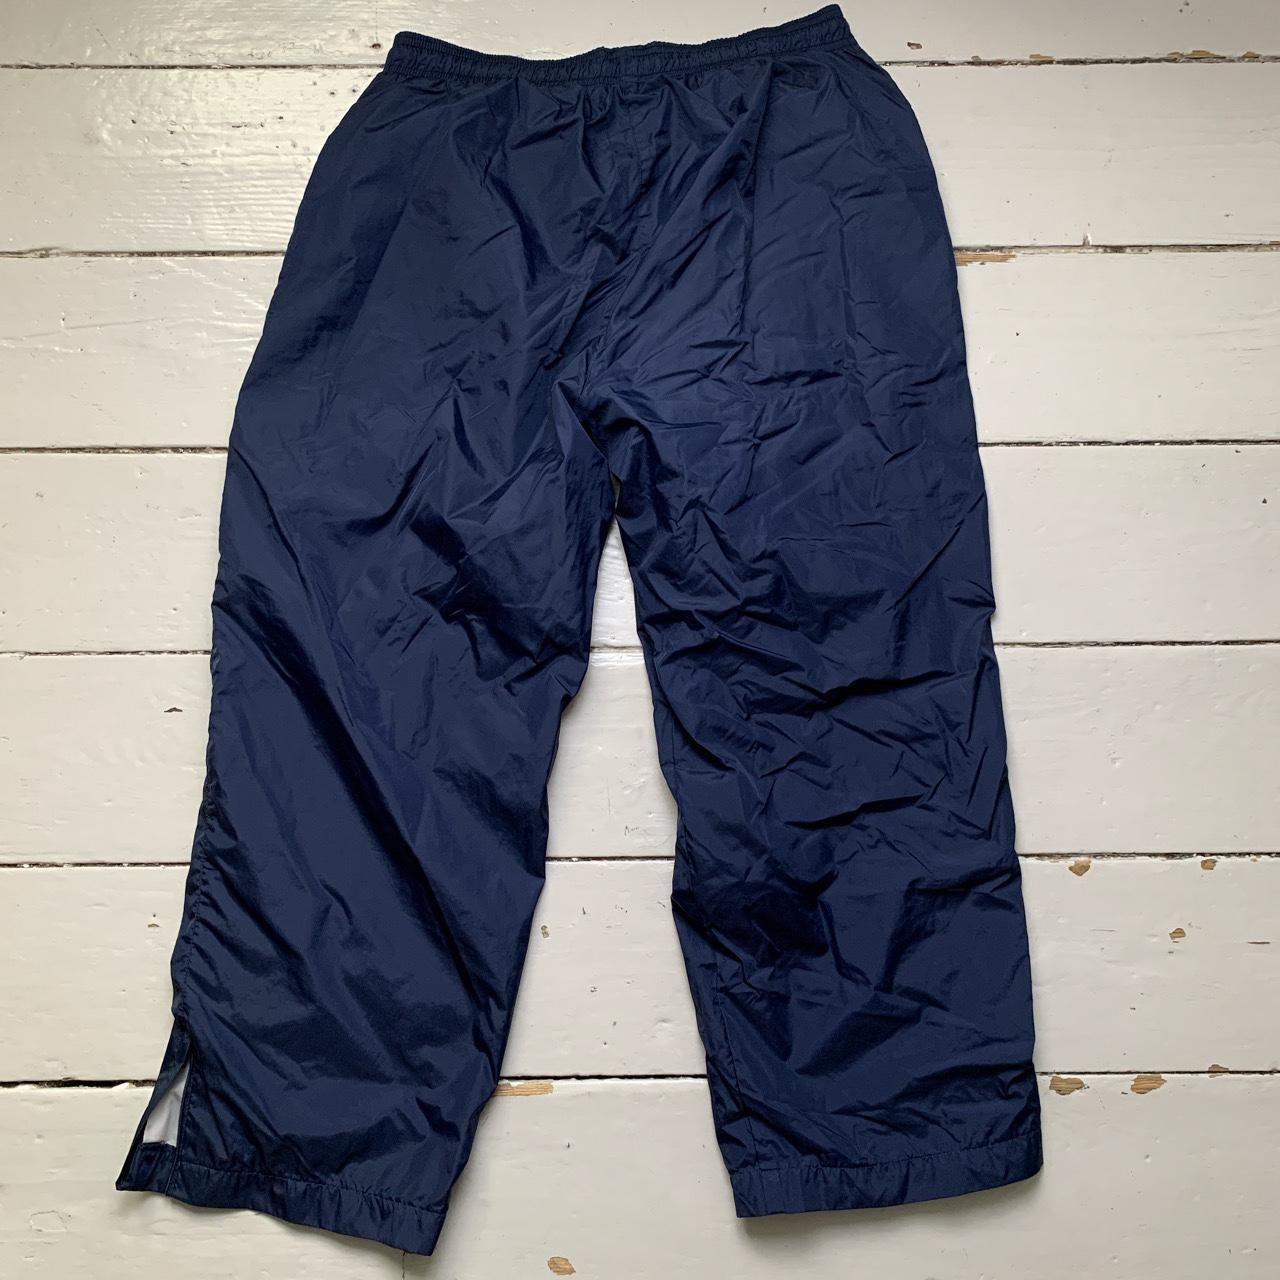 Reebok Navy and White Shell Trackpant Baggy Shorts